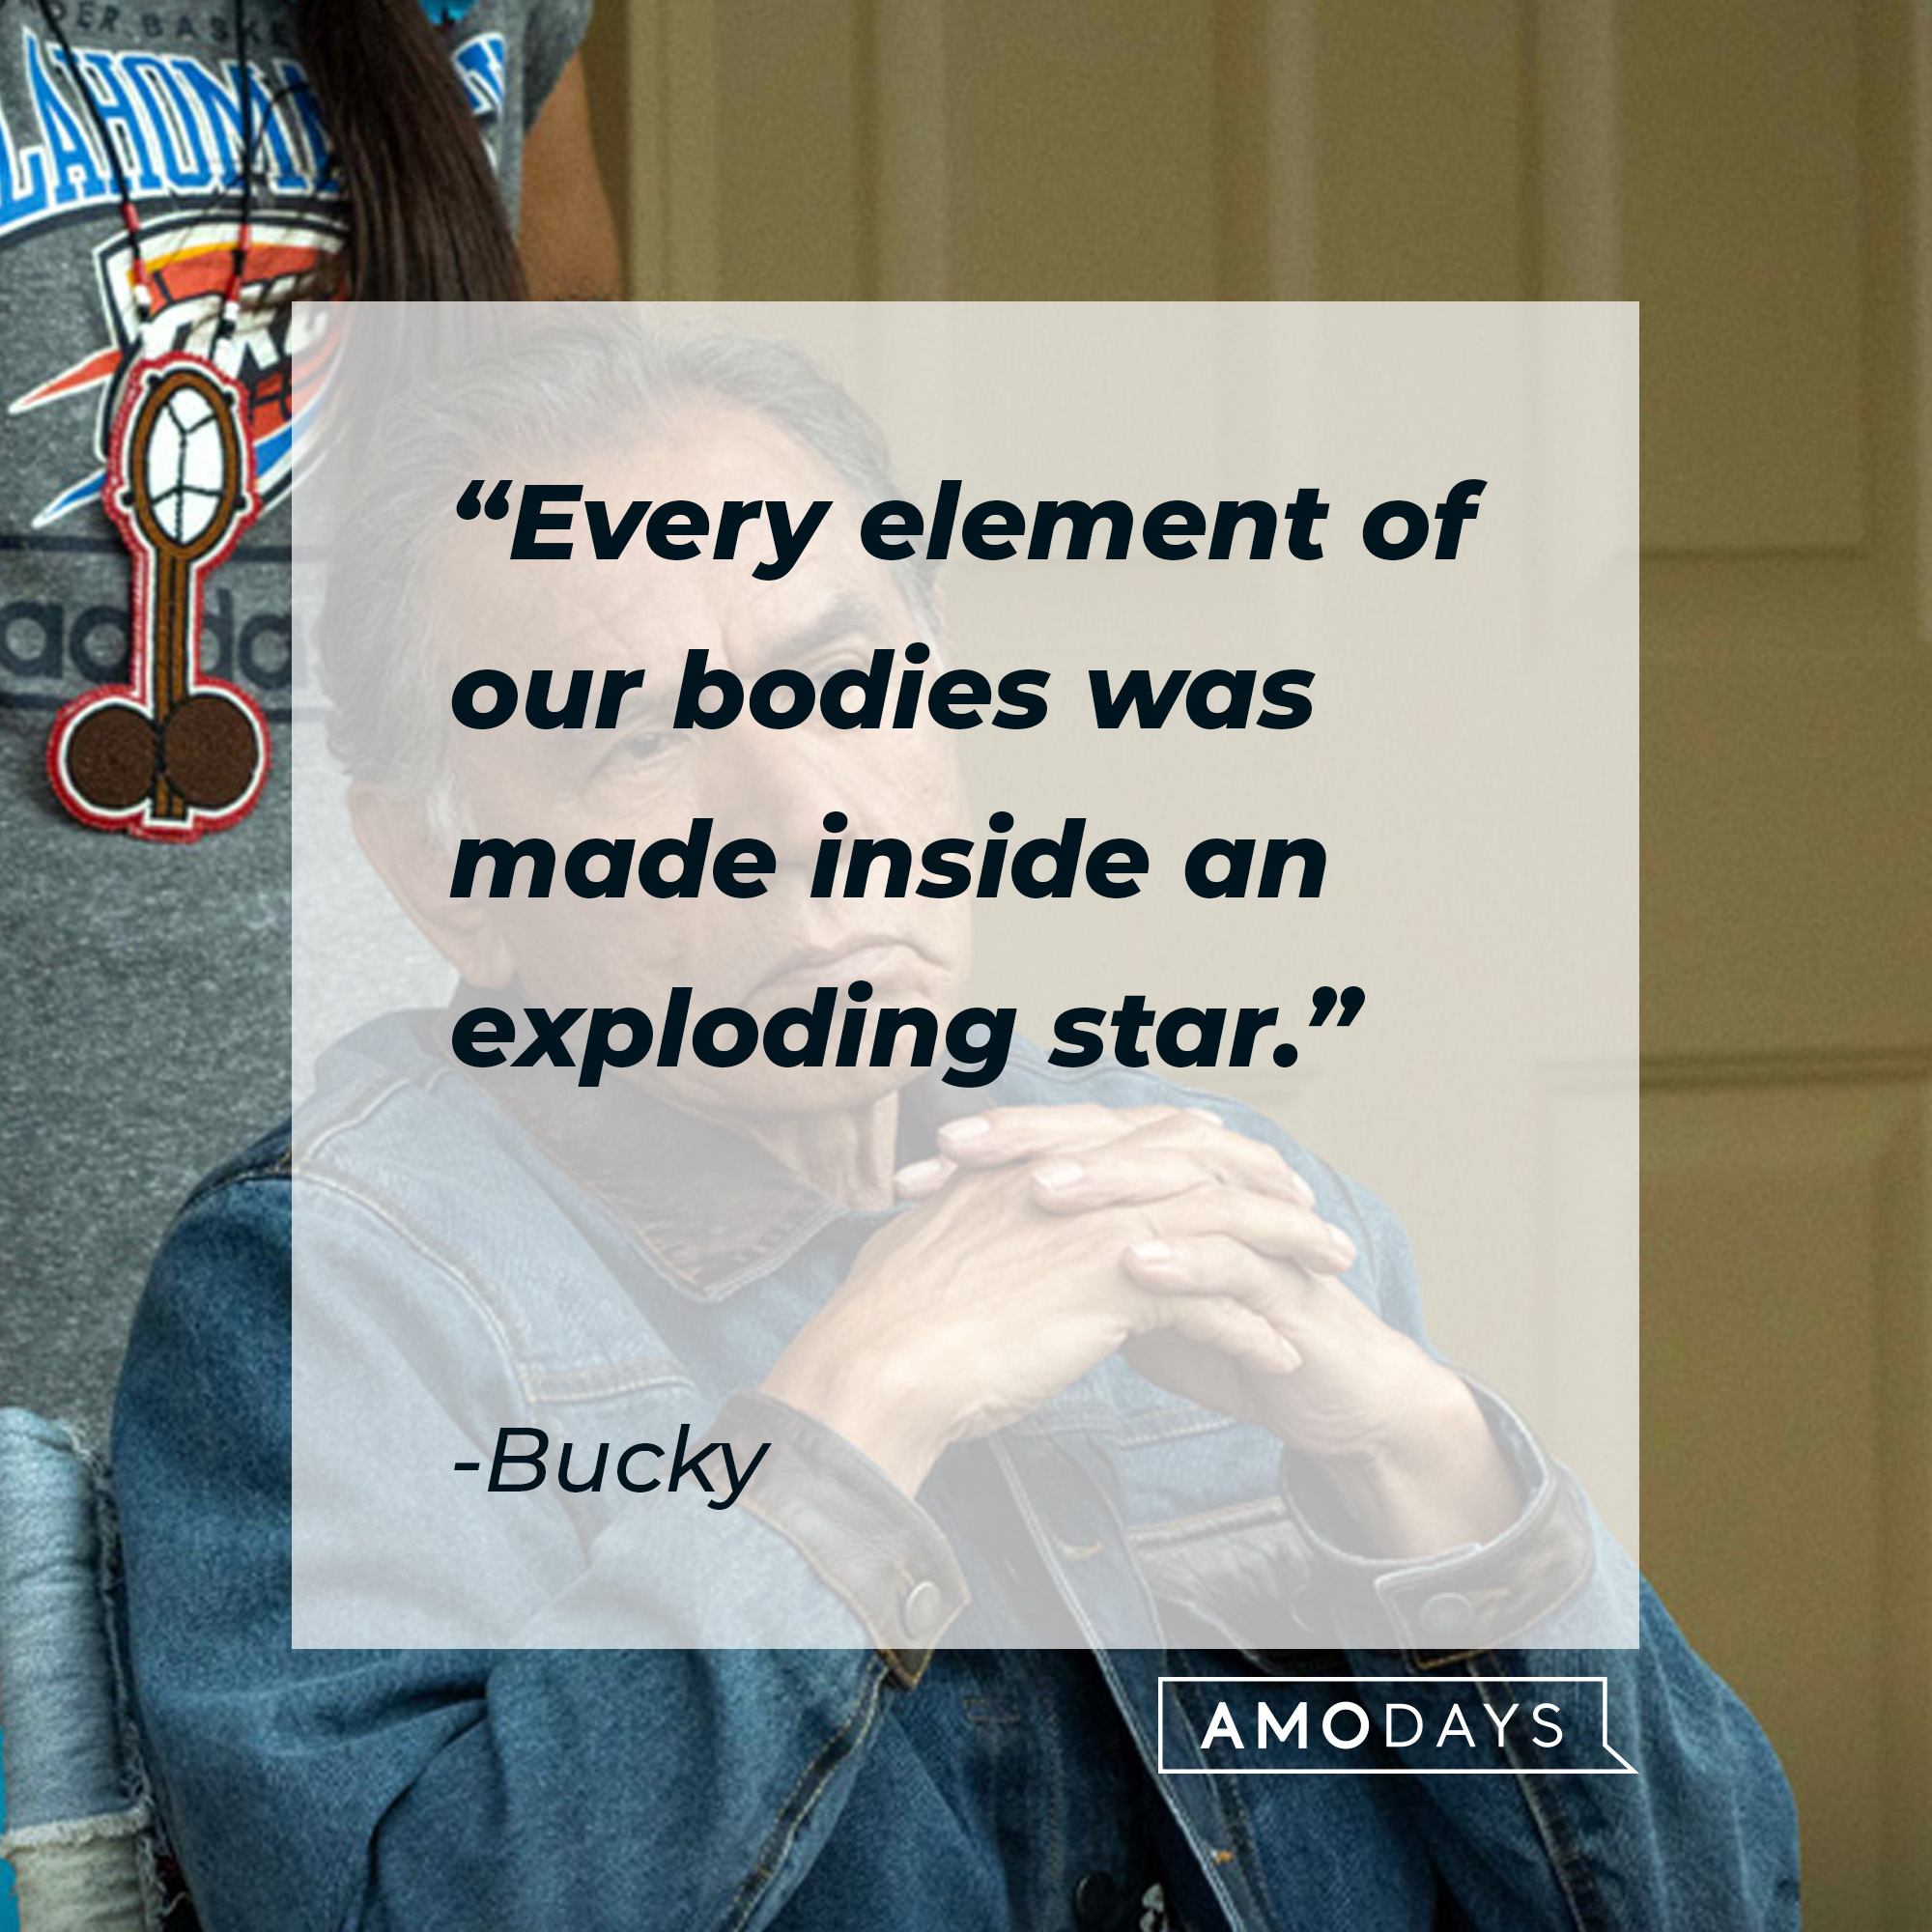 Bucky, with his quote: “Every element of our bodies was made inside an exploding star.” | Source: Facebook.com/RezDogsFX